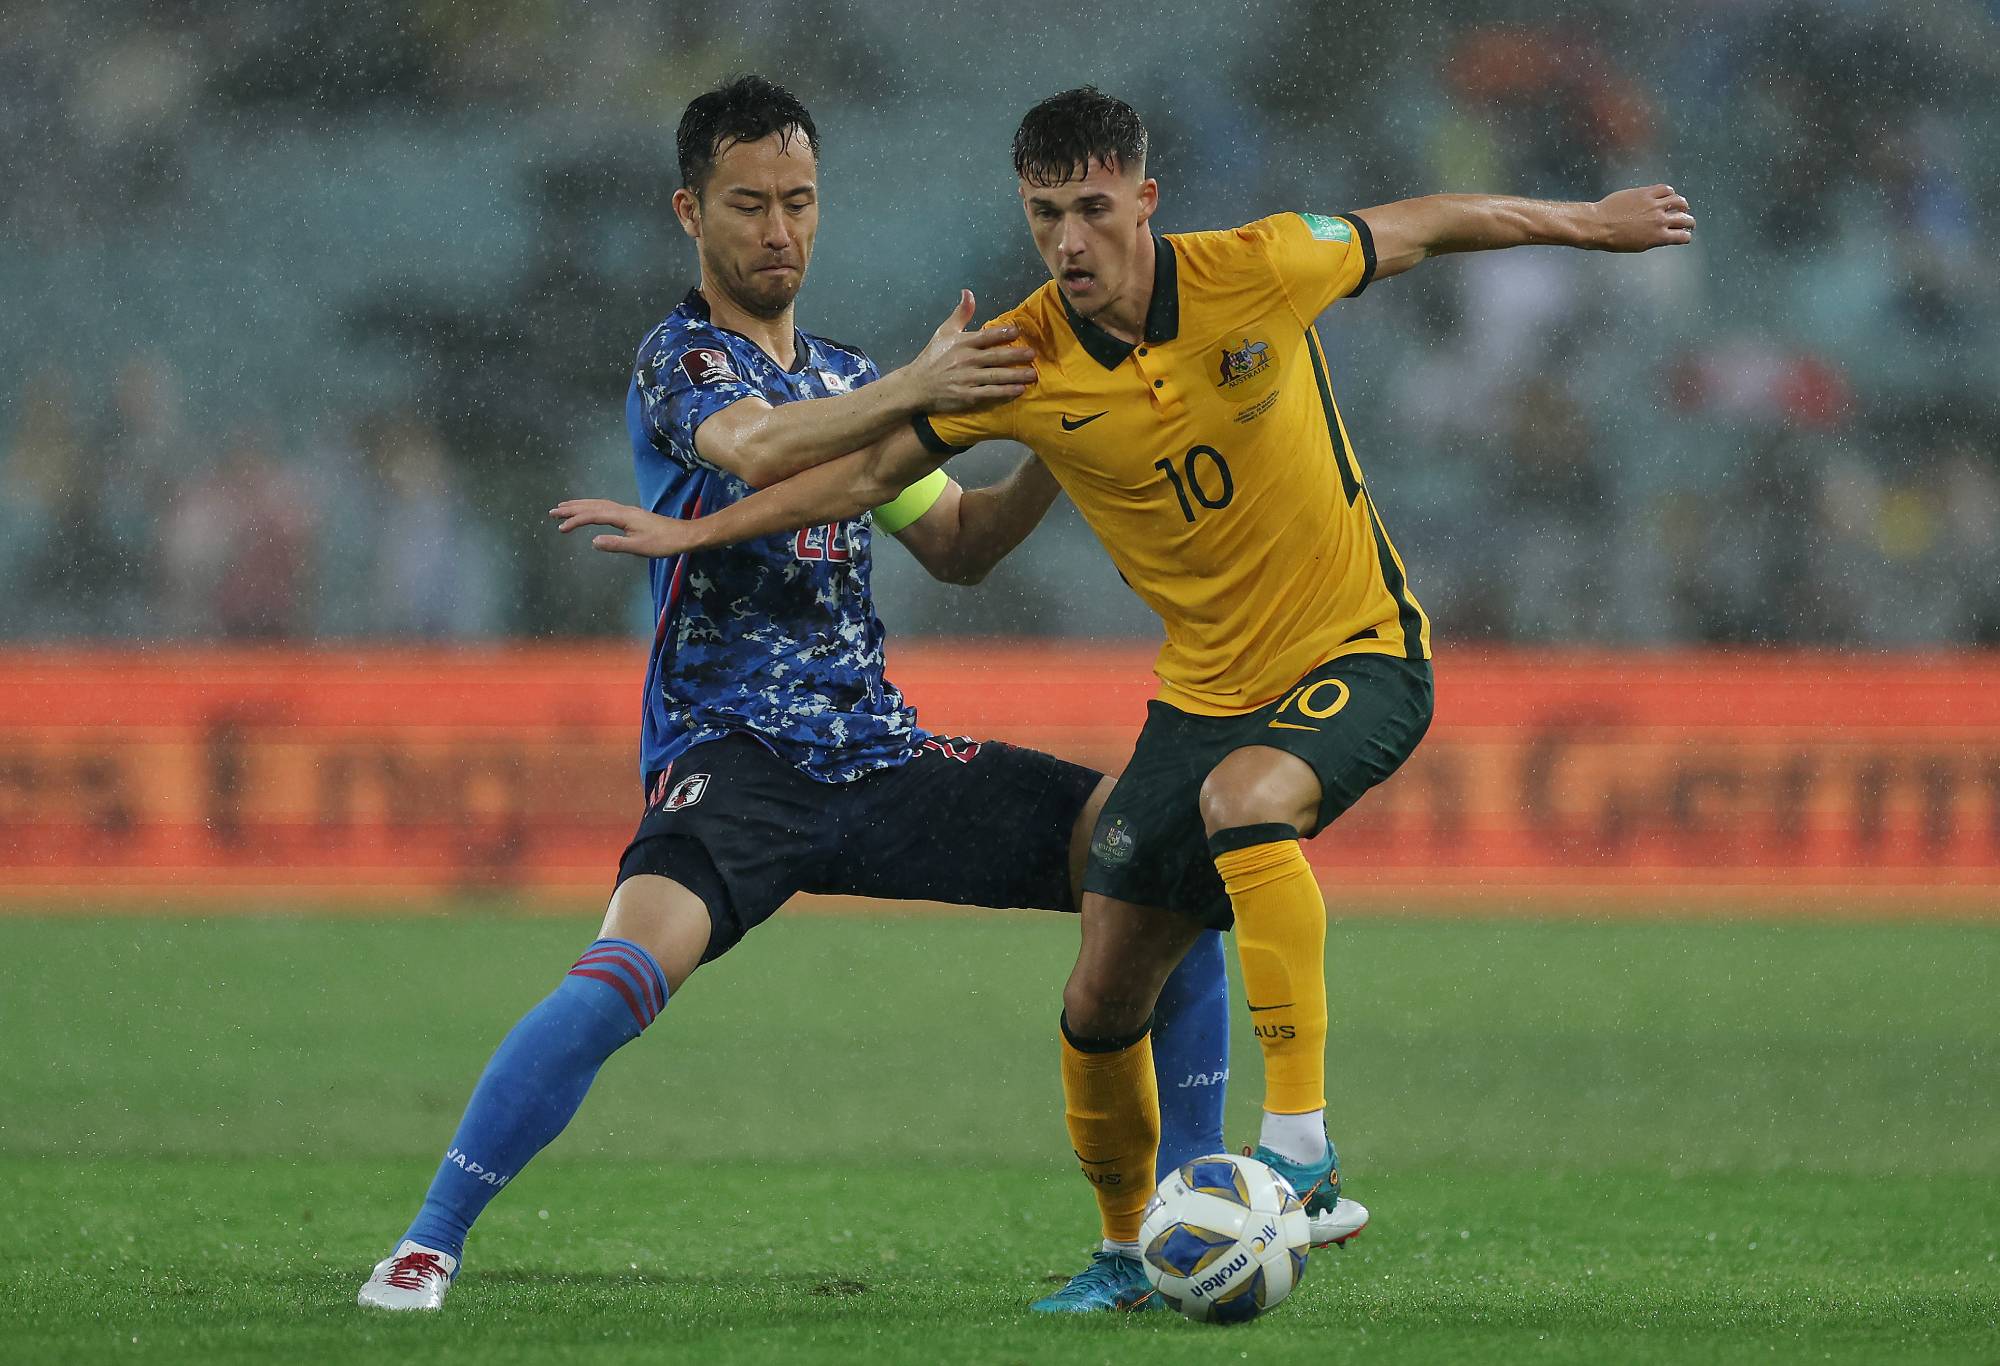 Maya Yoshida of Japan and Ajdin Hrustic of the Socceroos compete for the ball during the FIFA World Cup Qatar 2022 AFC Asian Qualifying match between the Australia Socceroos and Japan at Accor Stadium on March 24, 2022 in Sydney, Australia. (Photo by Cameron Spencer/Getty Images)